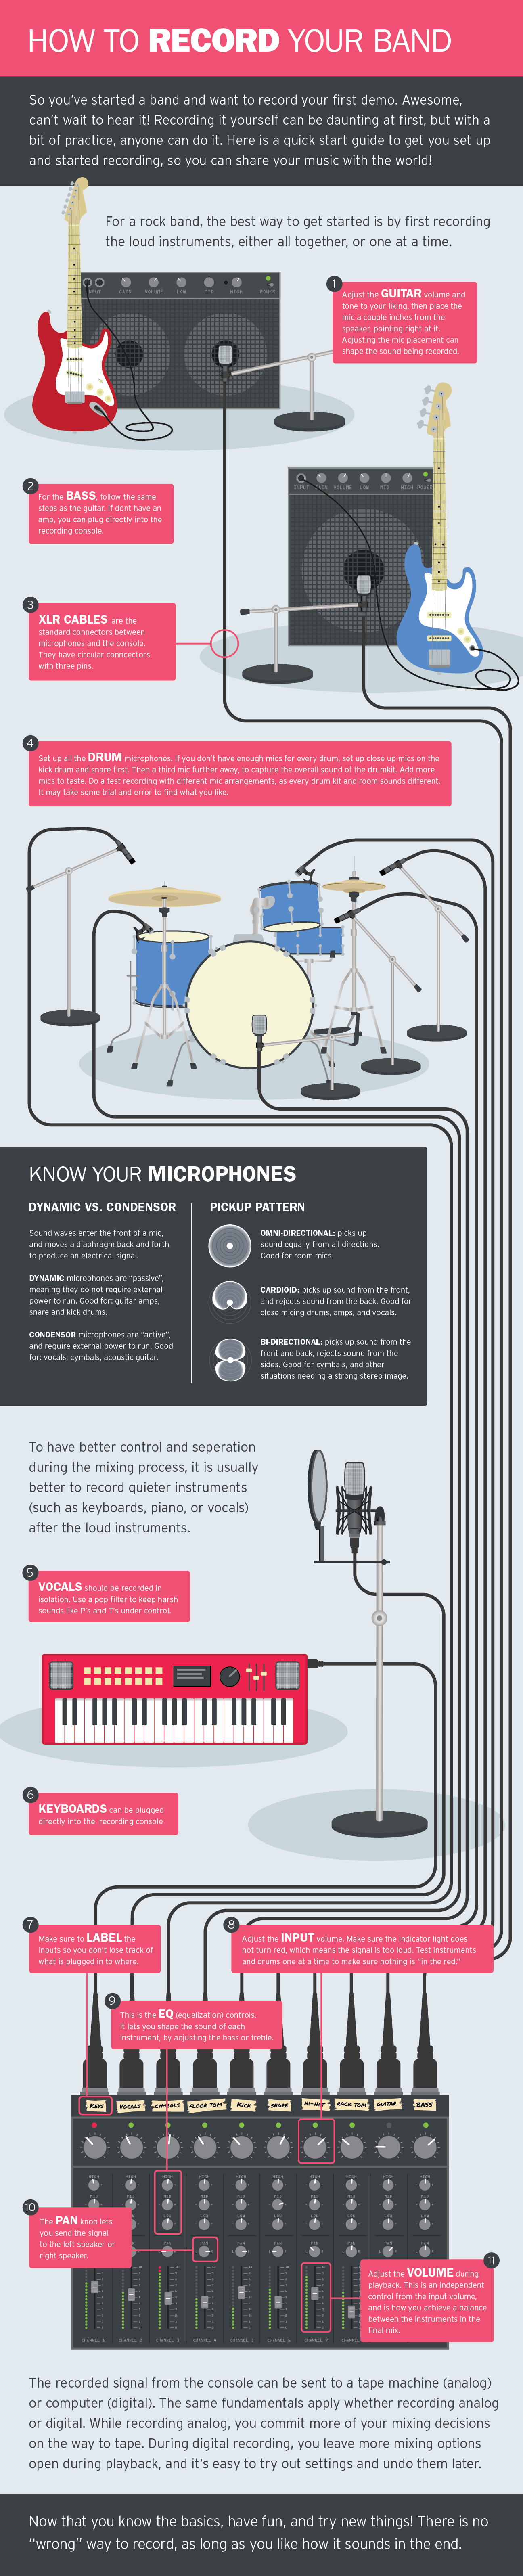 How to Record Your Band Infographic